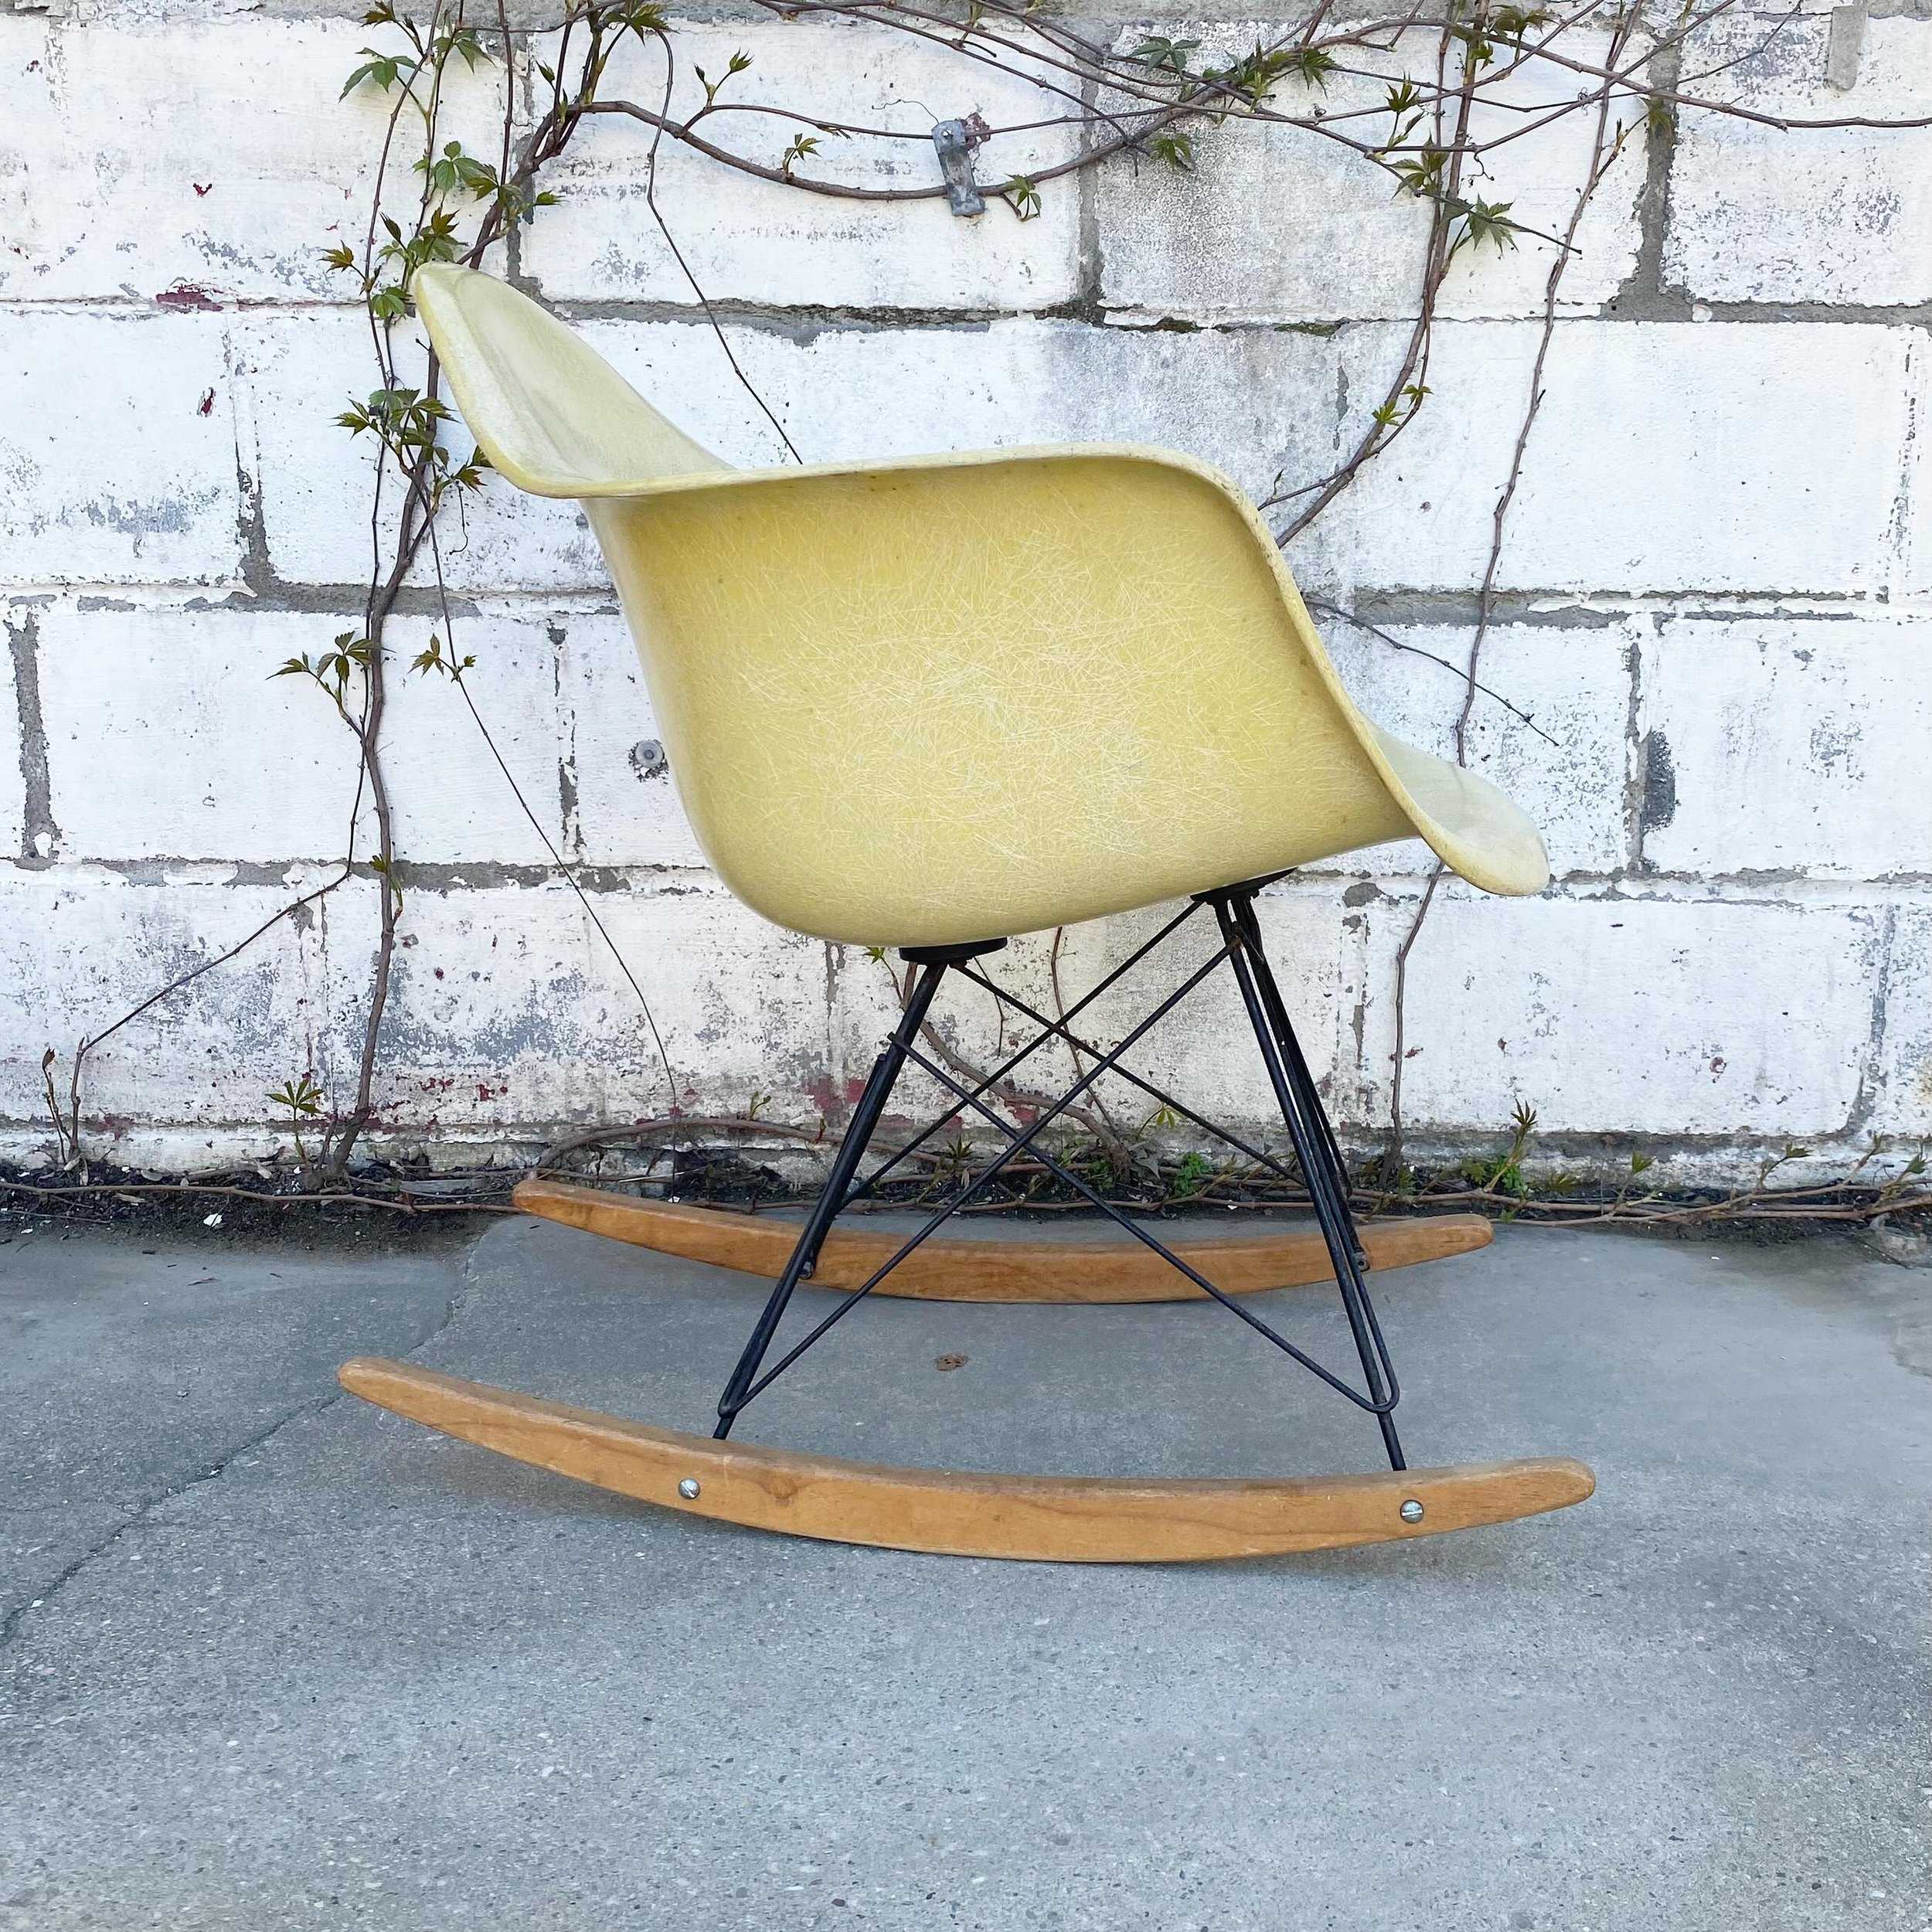 eames rocker and so much more in our auction on may 18th&hellip; catalog is online now!!! #midcenturymodern 
.
.
.
#eames #hermanmiller #eamesrocker #fiberglass #eiffeltowerbase #midcentury #modern #decorativearts #interiordecor #interiordecorating #